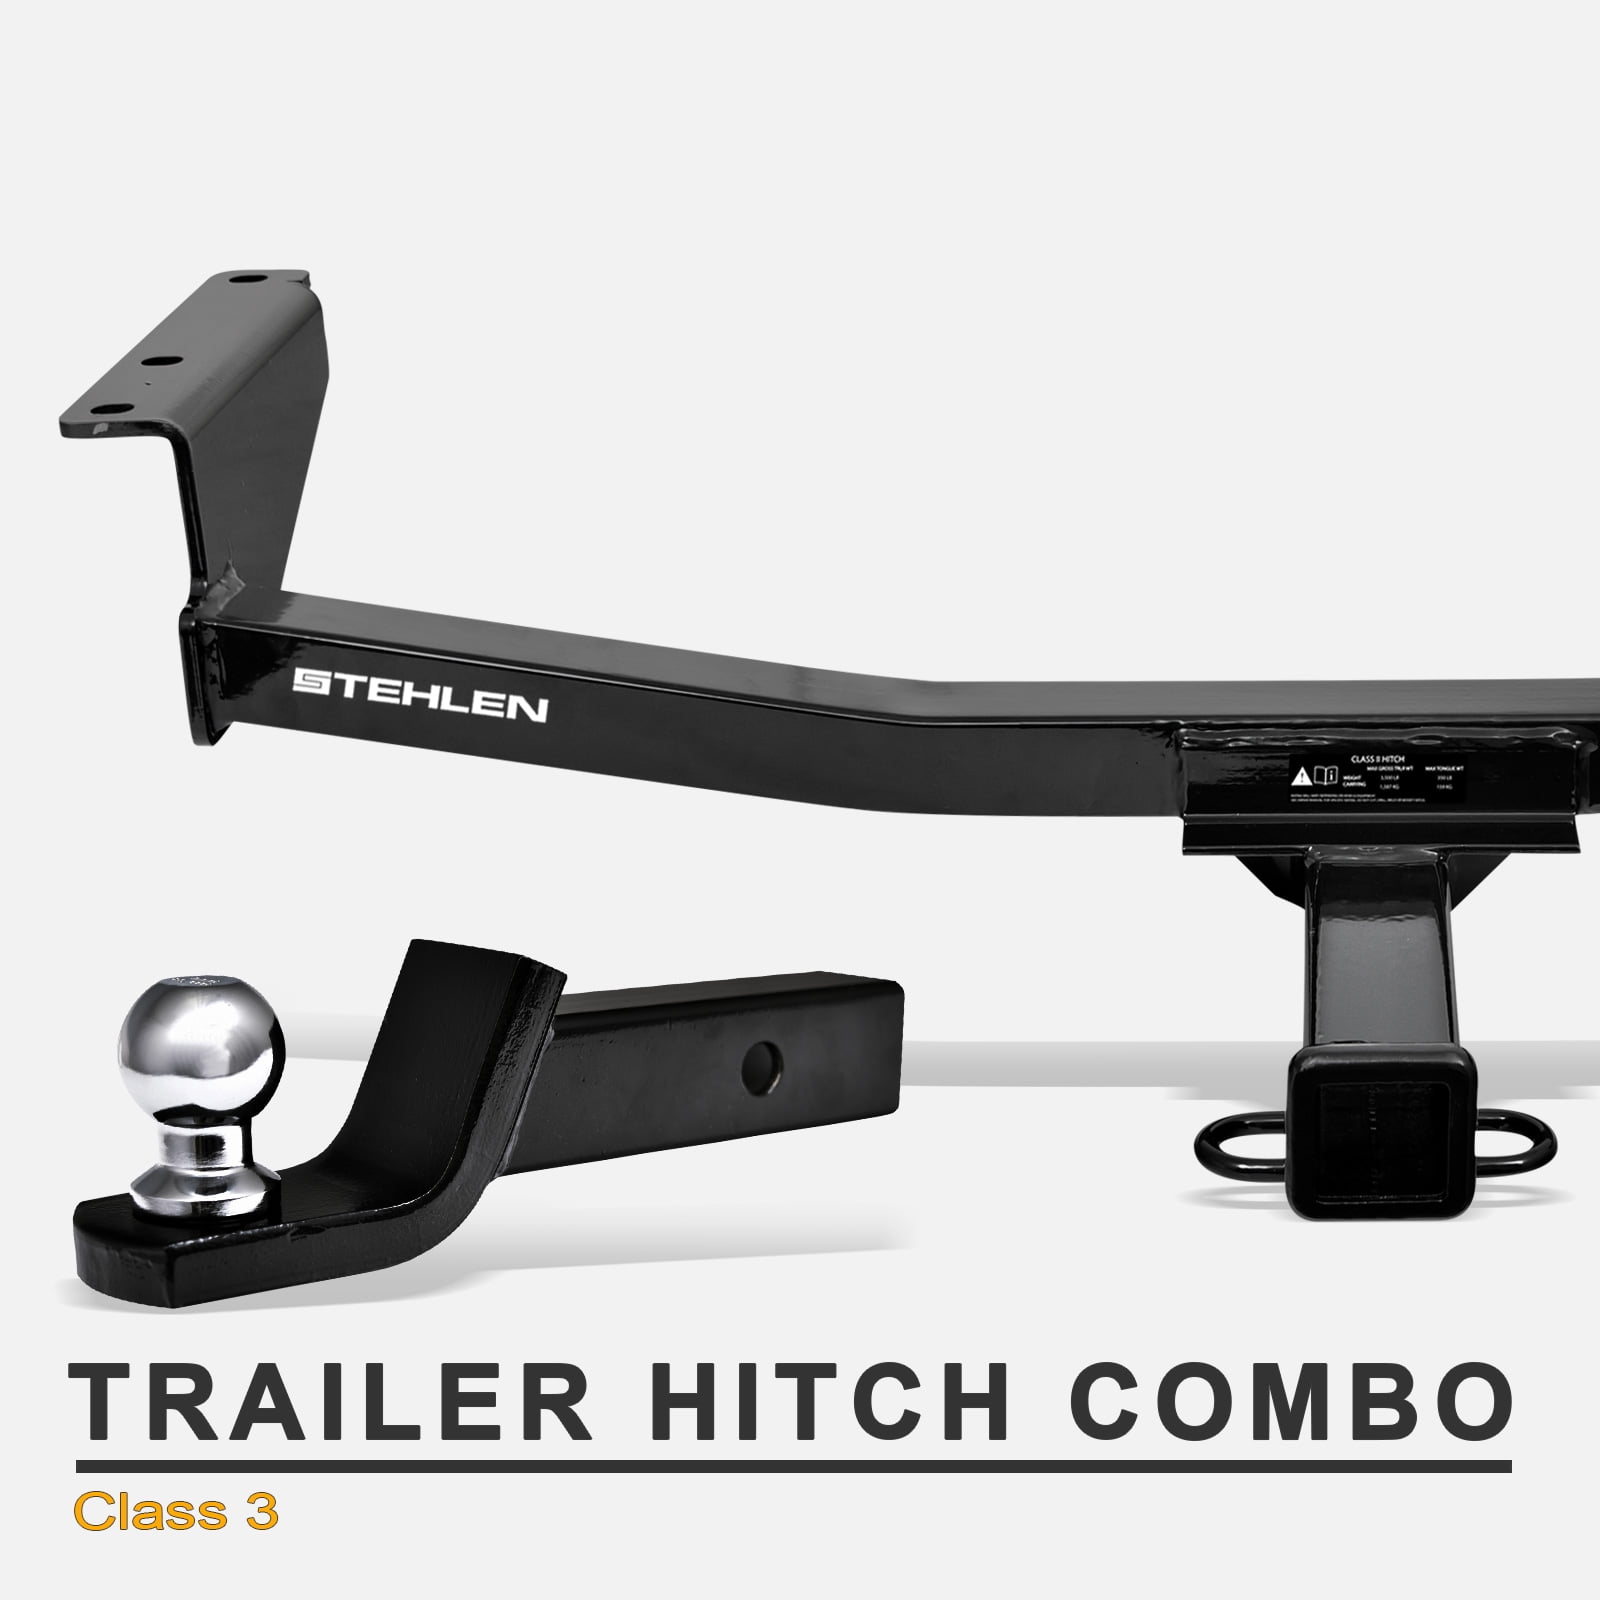 Stehlen 733469492337 Class 3 Trailer Hitch Receiver 2" with Loaded Ball 2014 Nissan Rogue Trailer Hitch